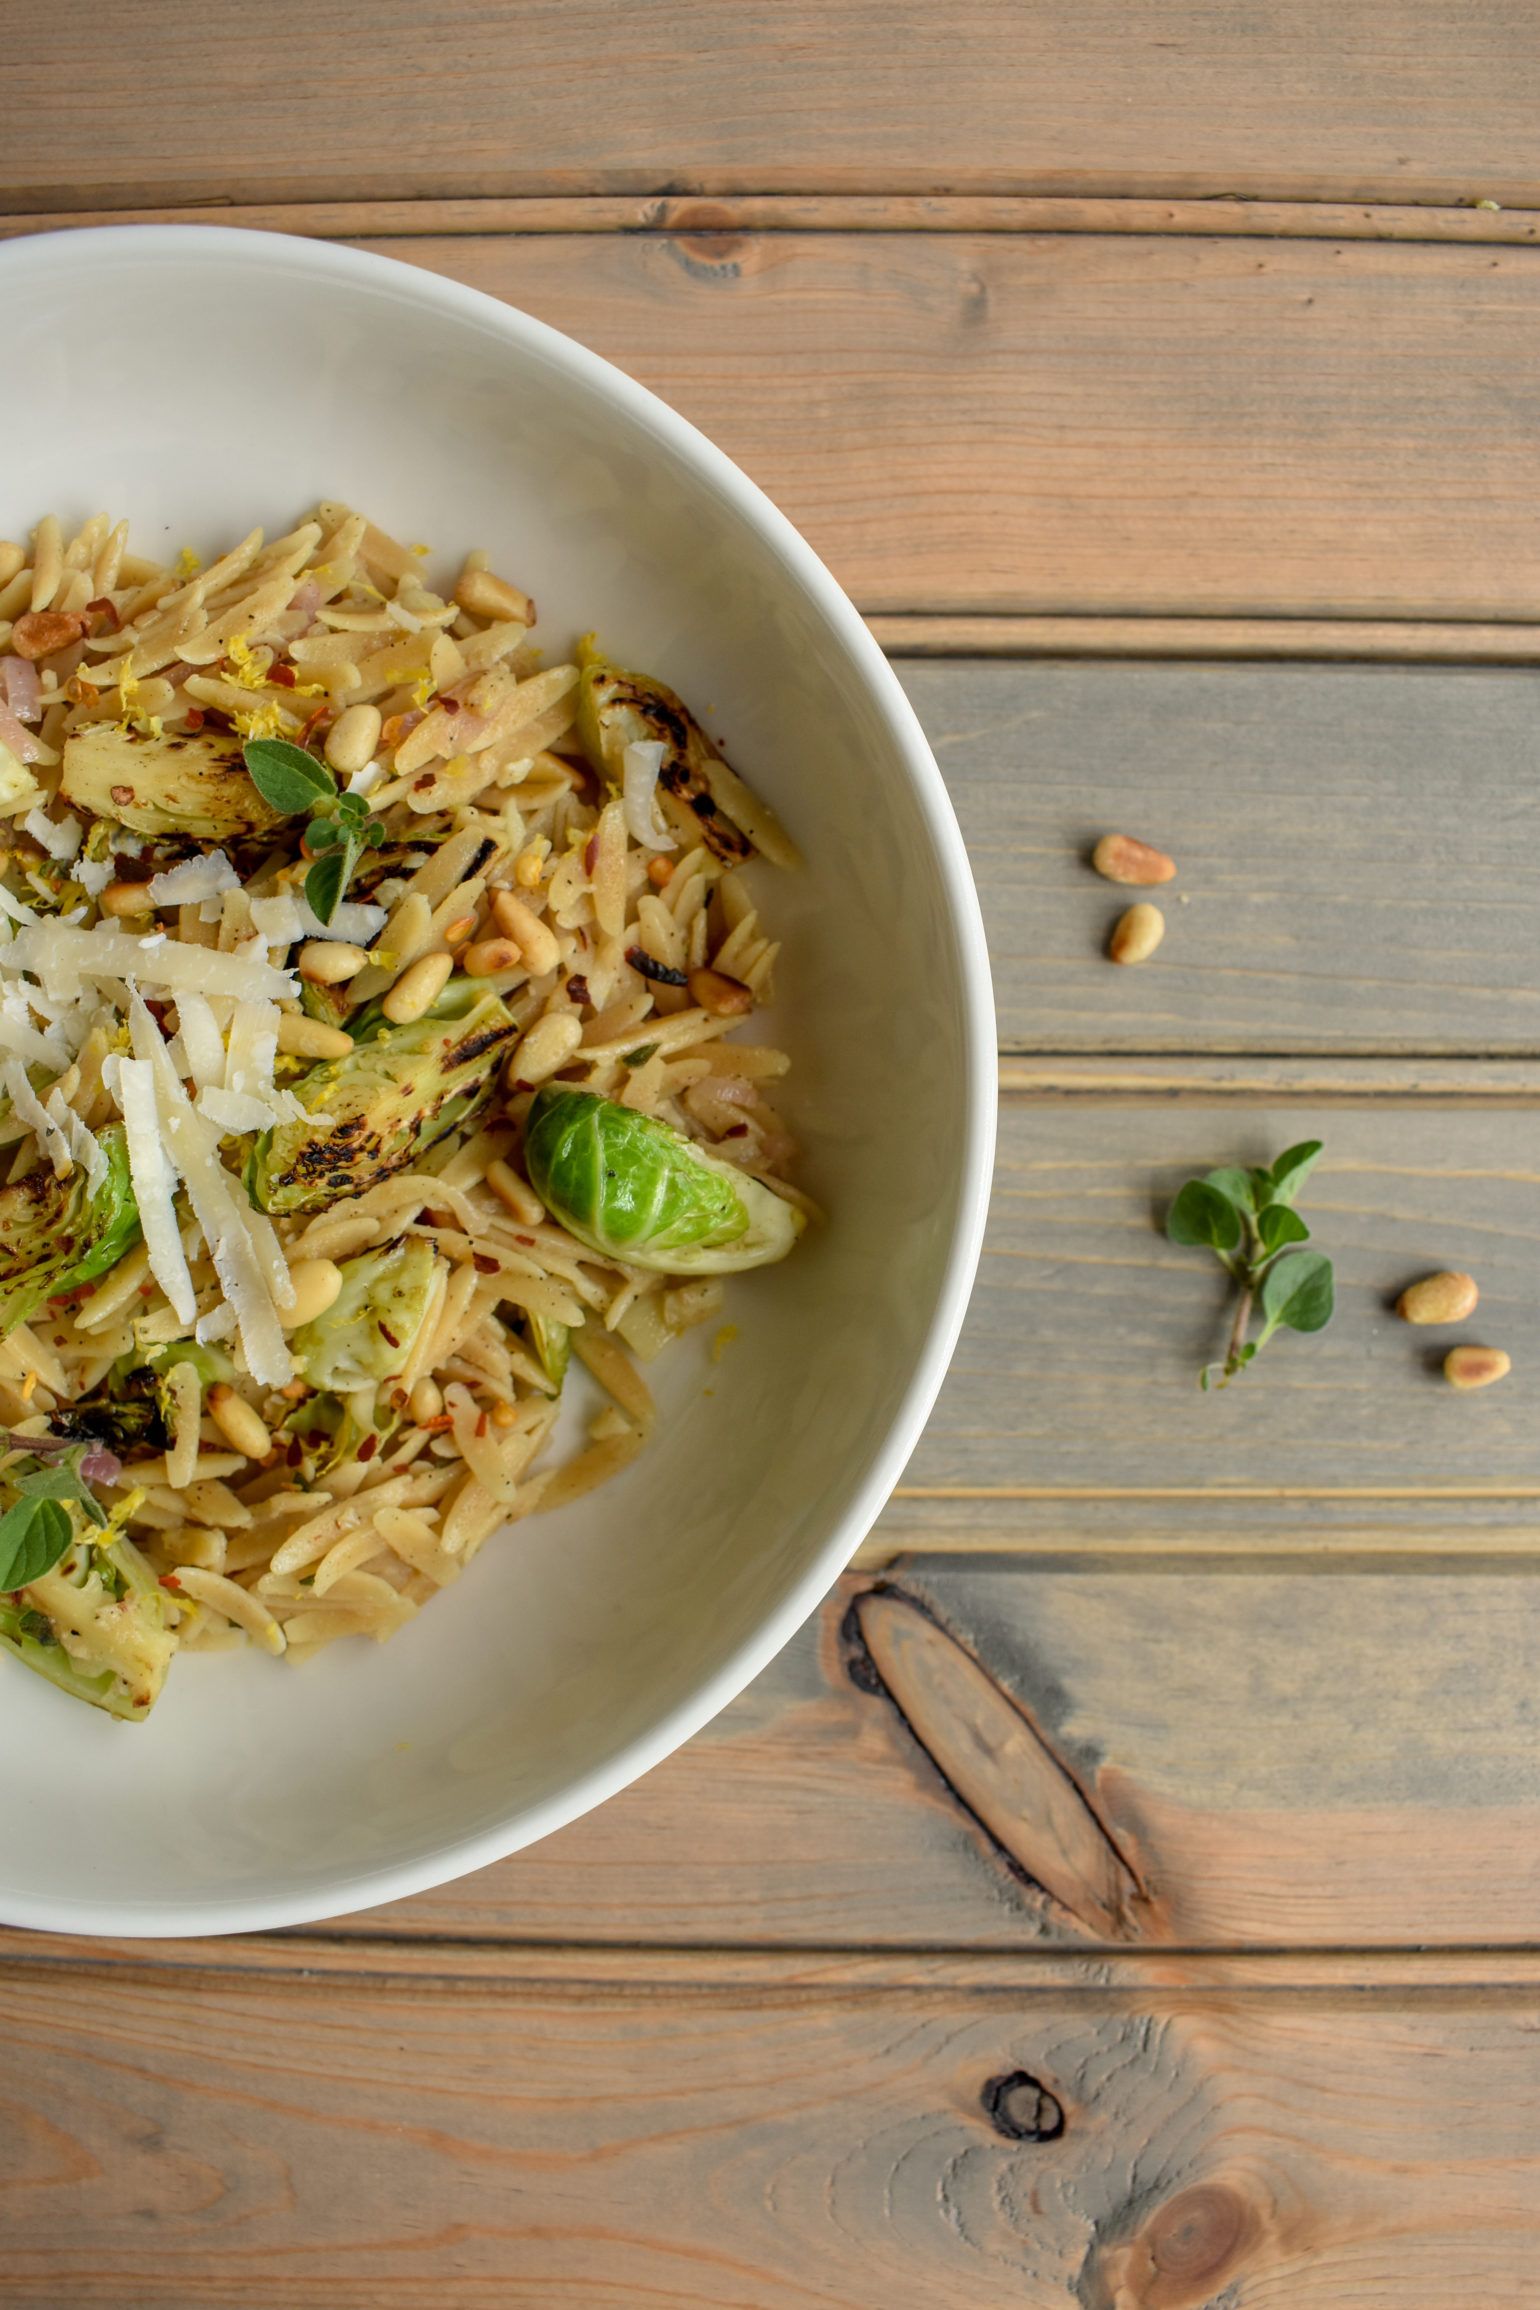 Orzo and Charred Brussels Sprouts in White Wine